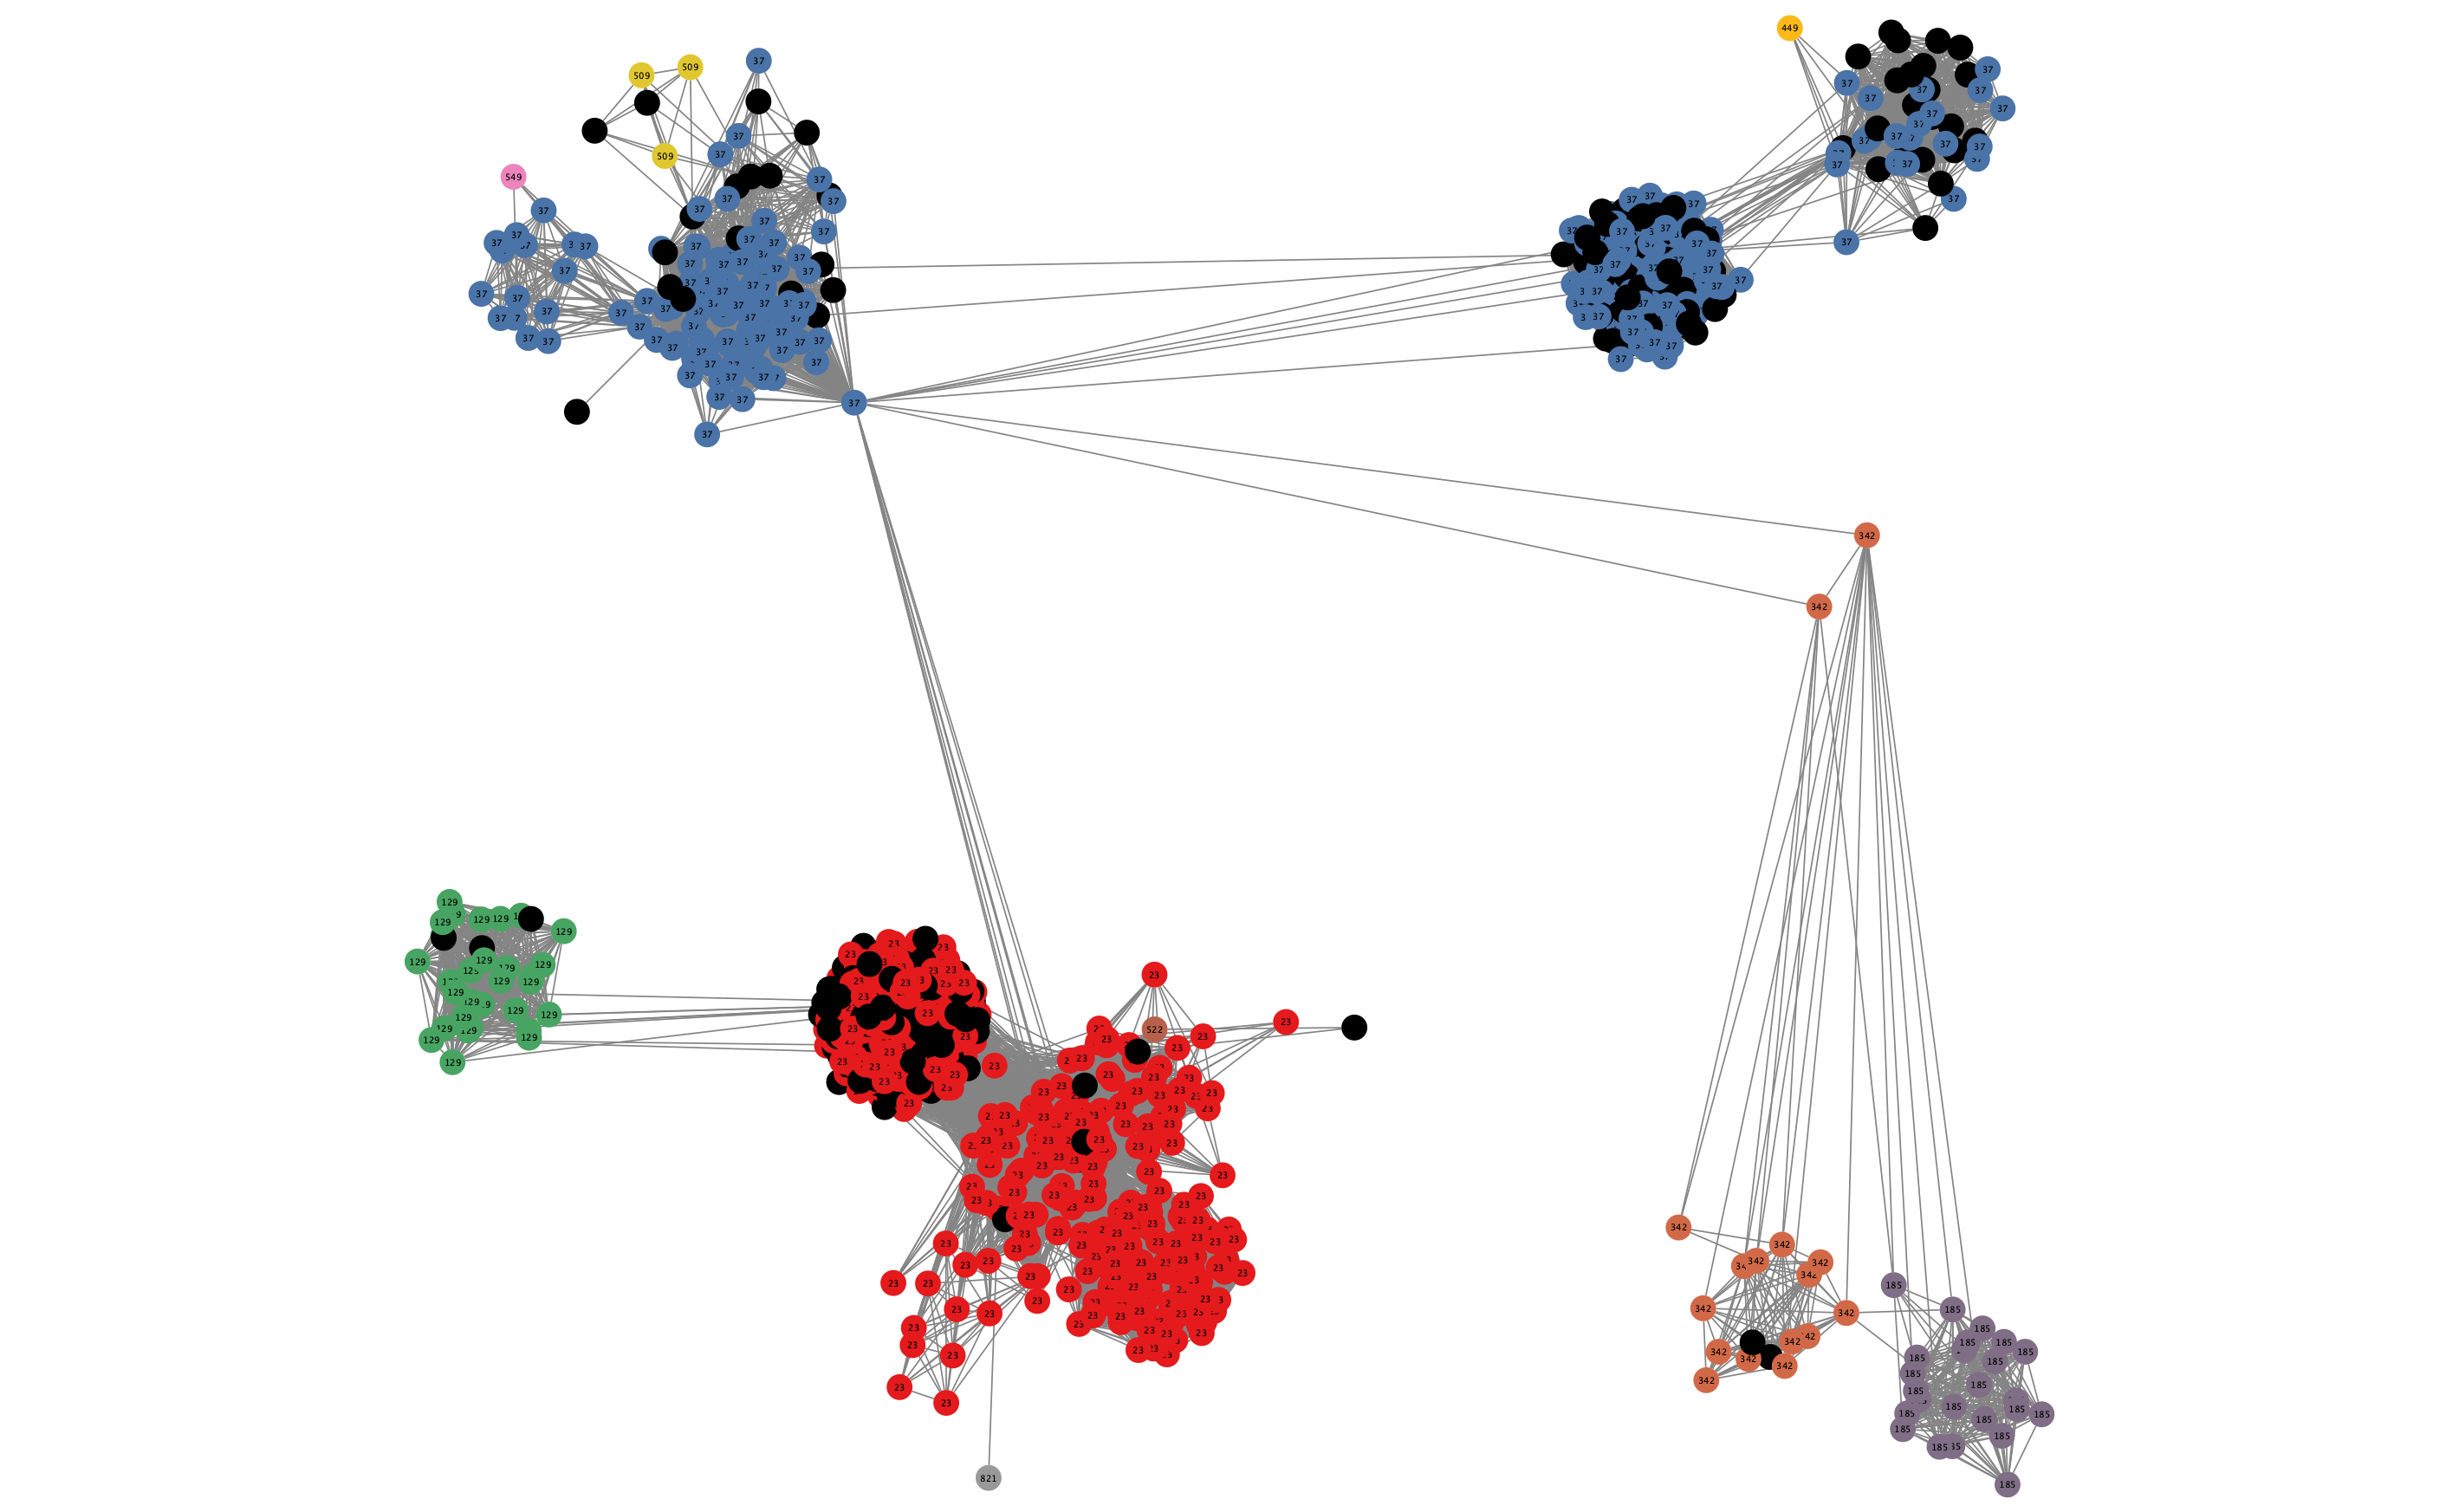 Network with added annotation